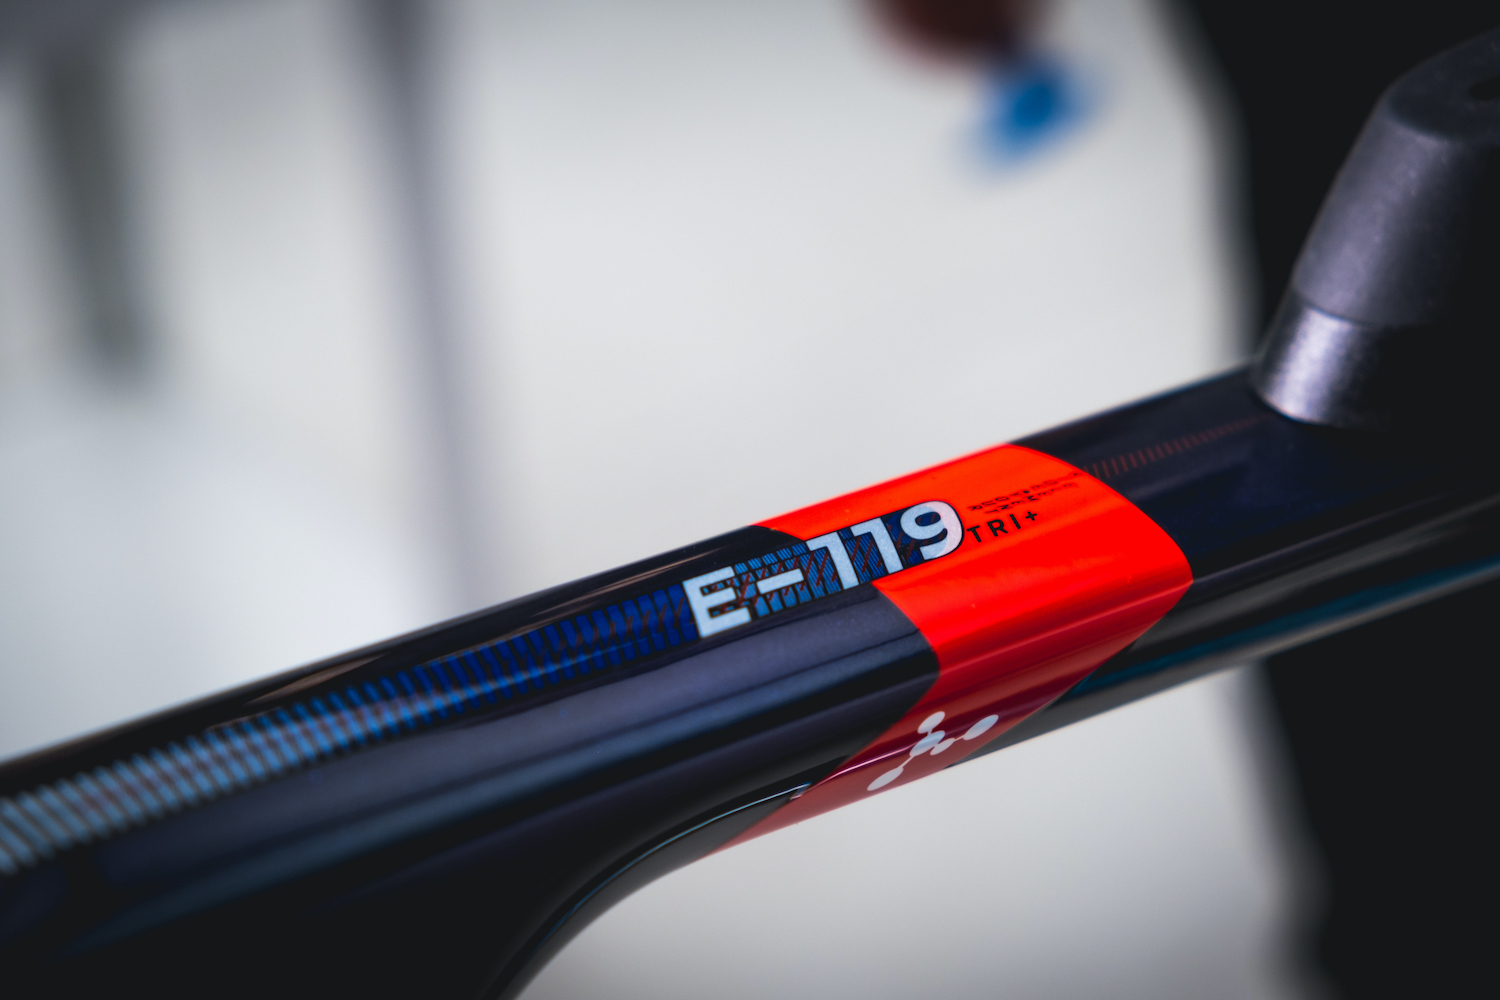 A close up of the top tube on the Argon 18 E119 Tri+ Disc bike